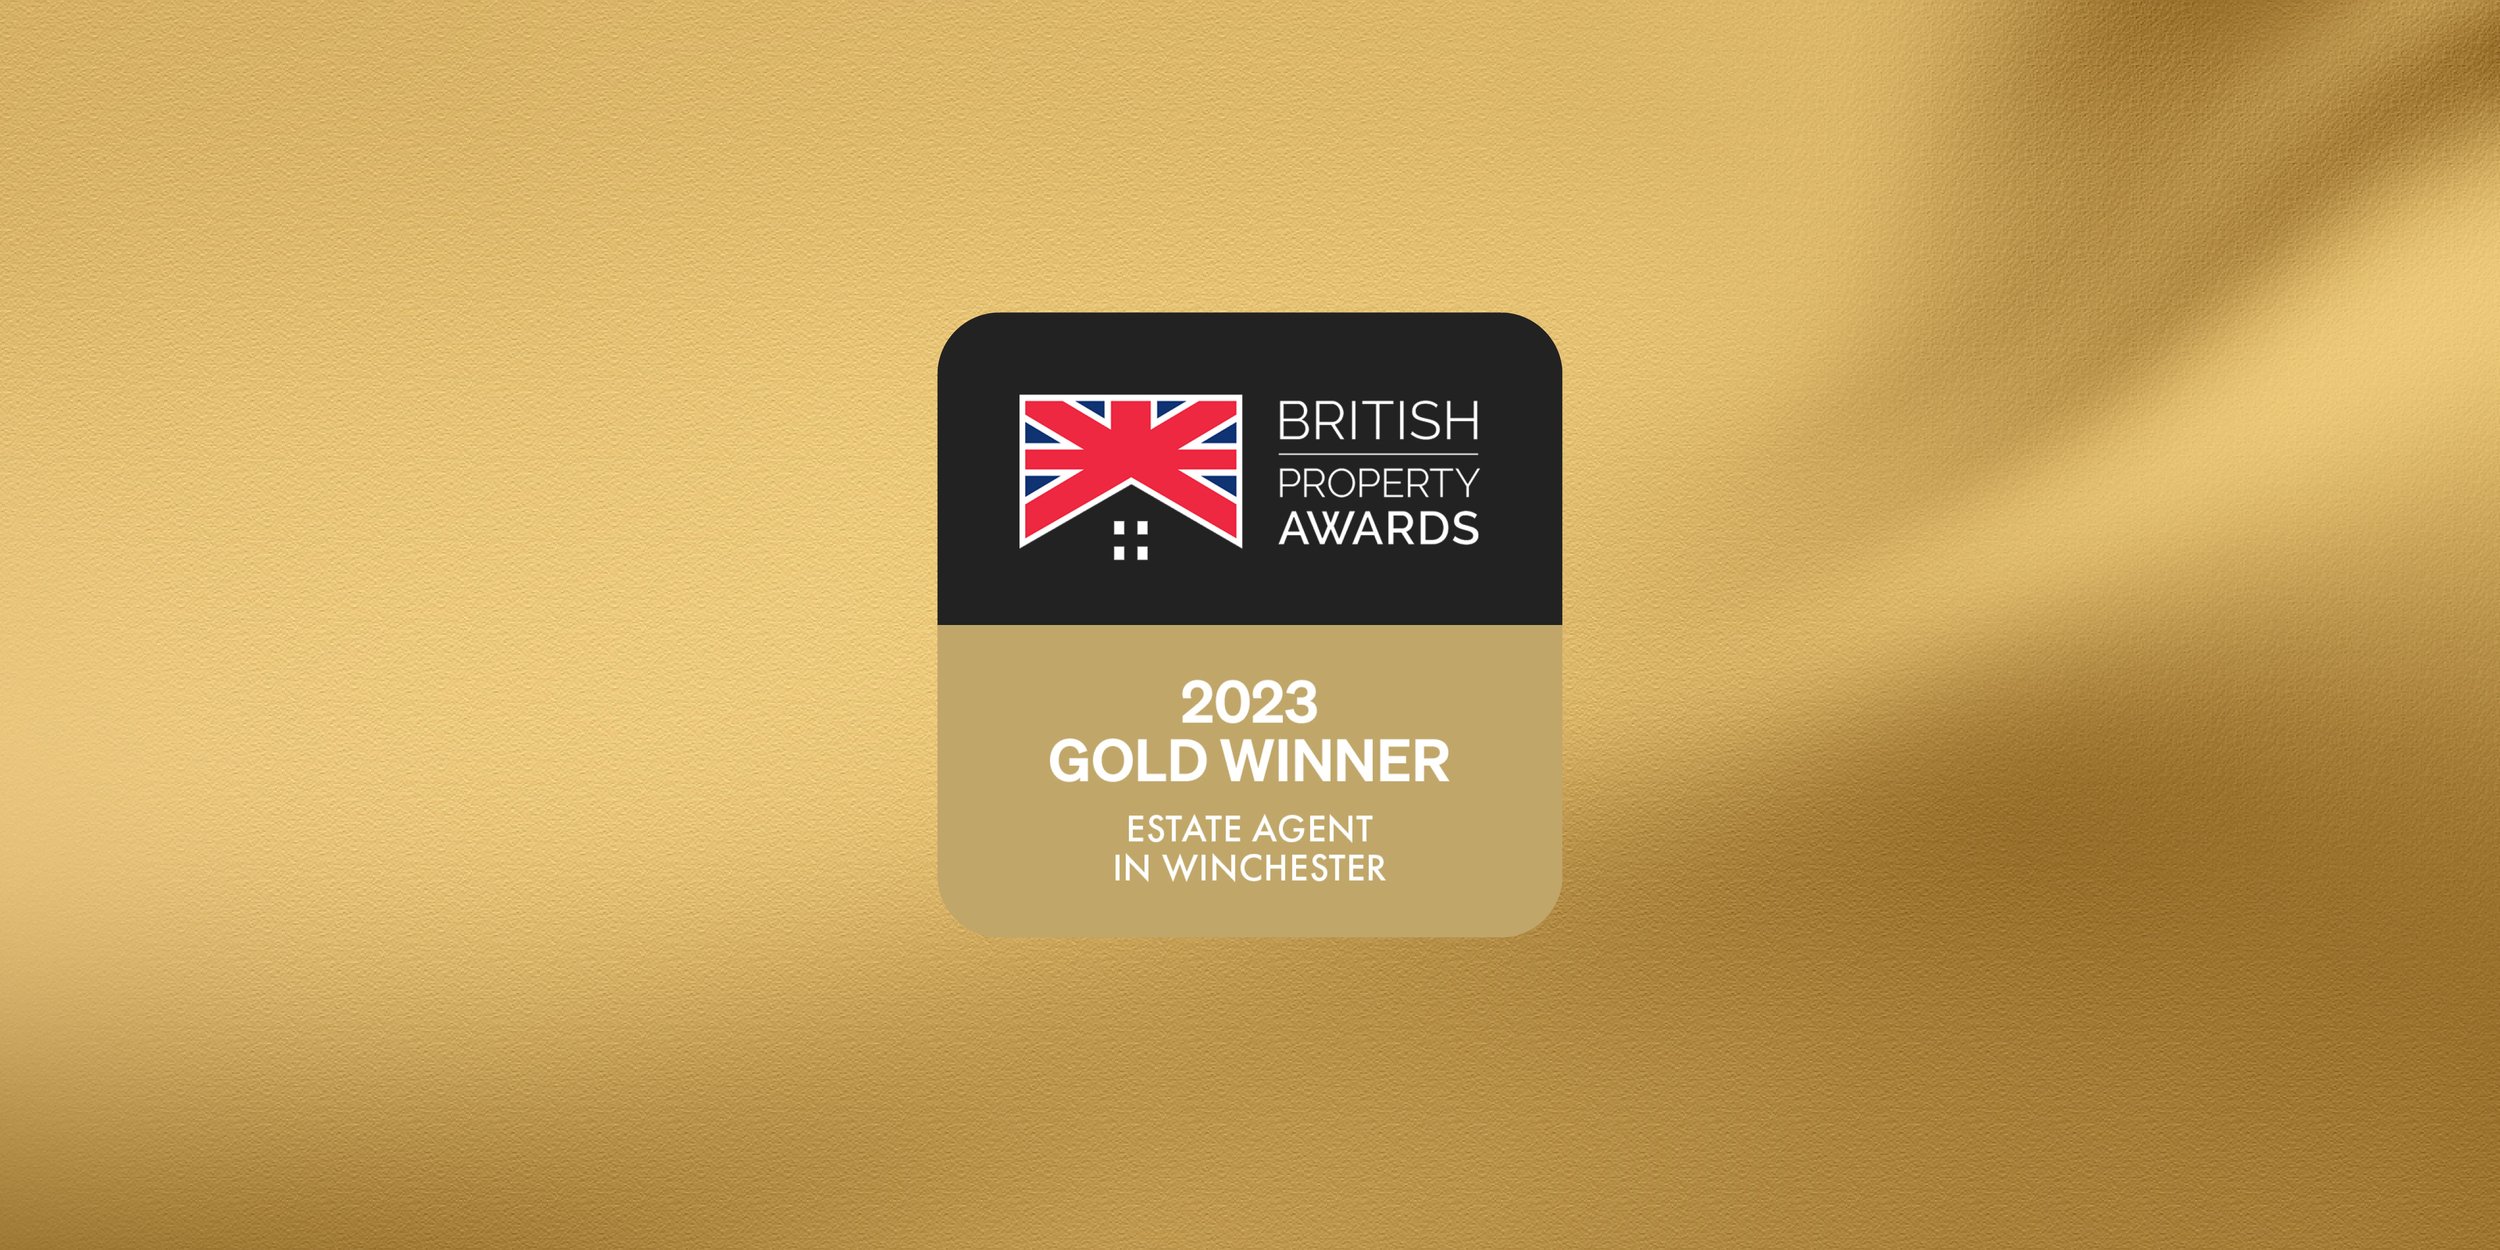 Dybles | We’ve won GOLD at the 2023 British Property Awards!